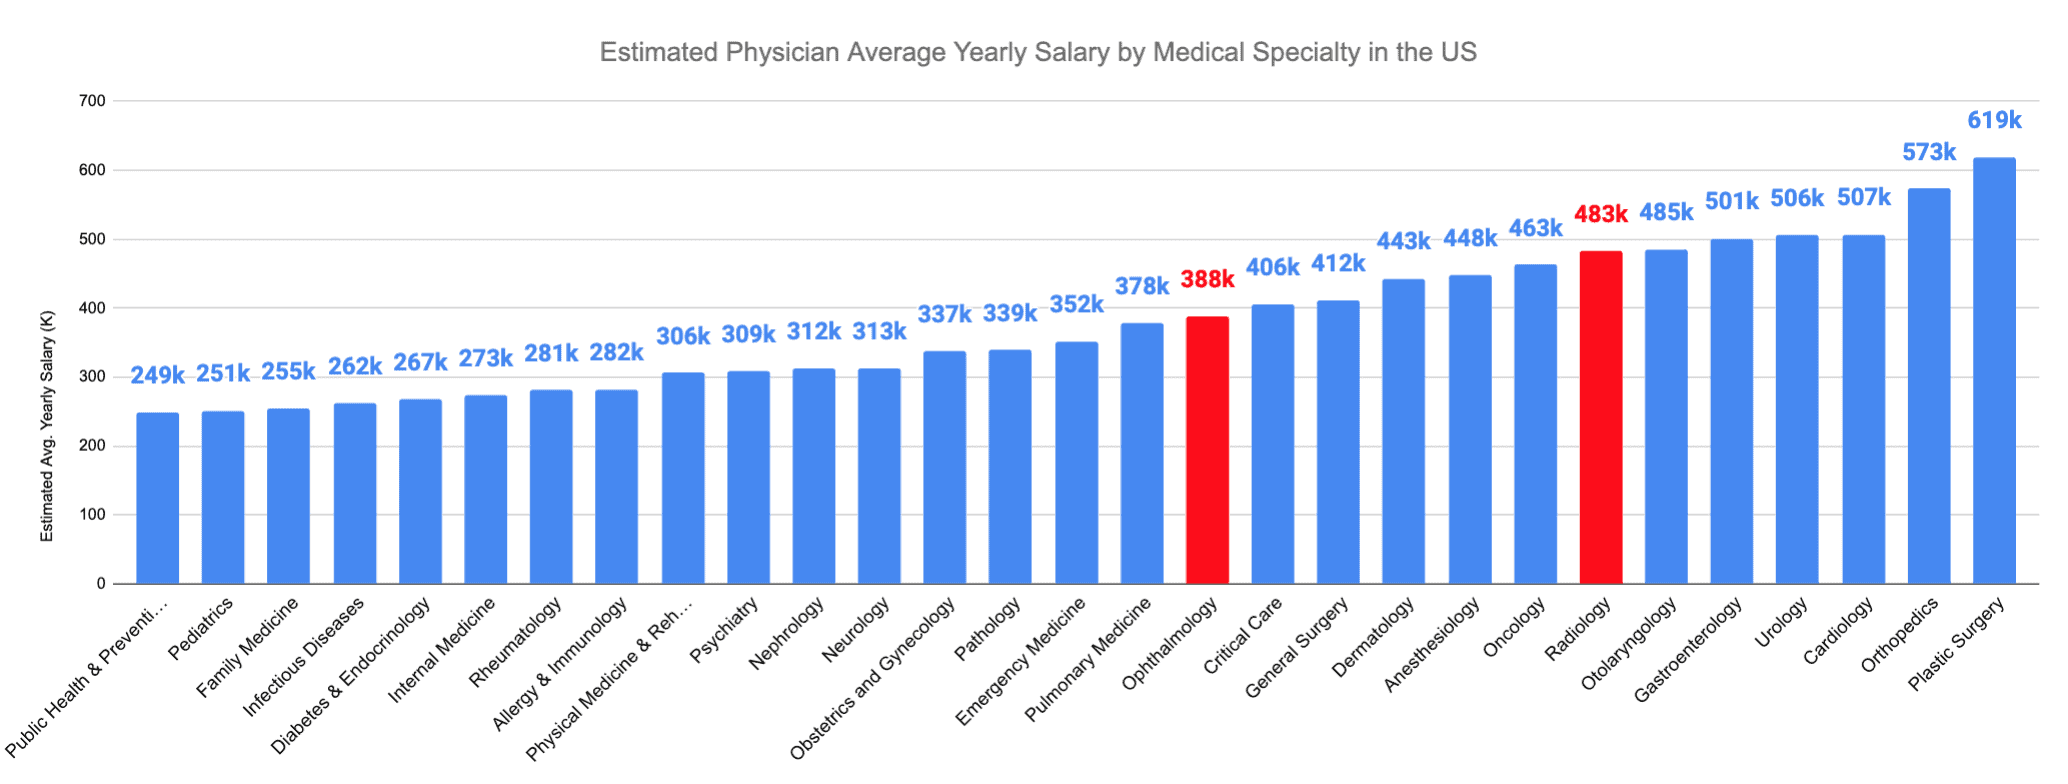 Radiology vs. Ophthalmology Estimated Physician Average Yearly Salary by Medical Specialty in the US